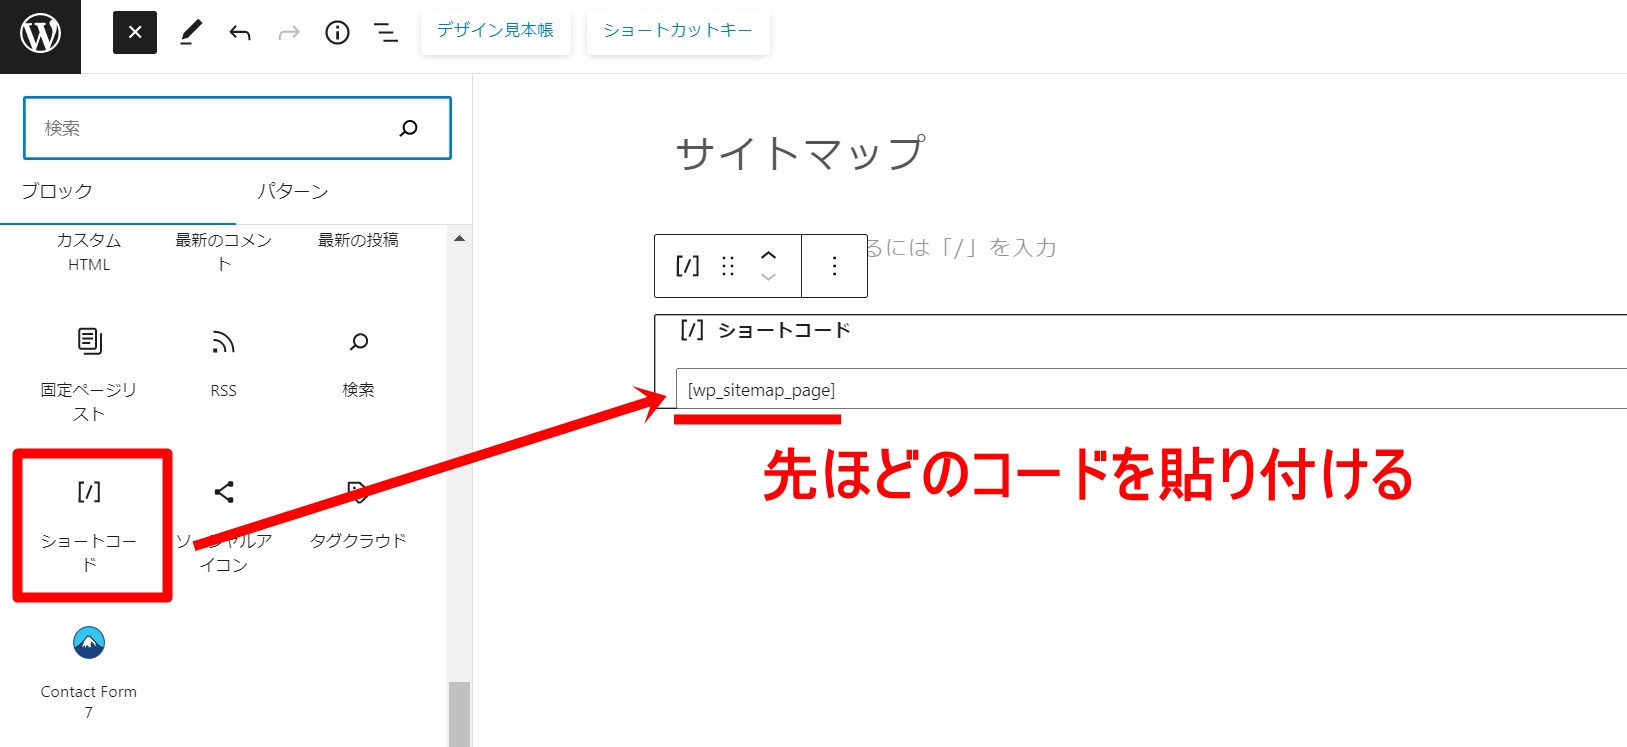 WP Sitemap Pageの使い方５